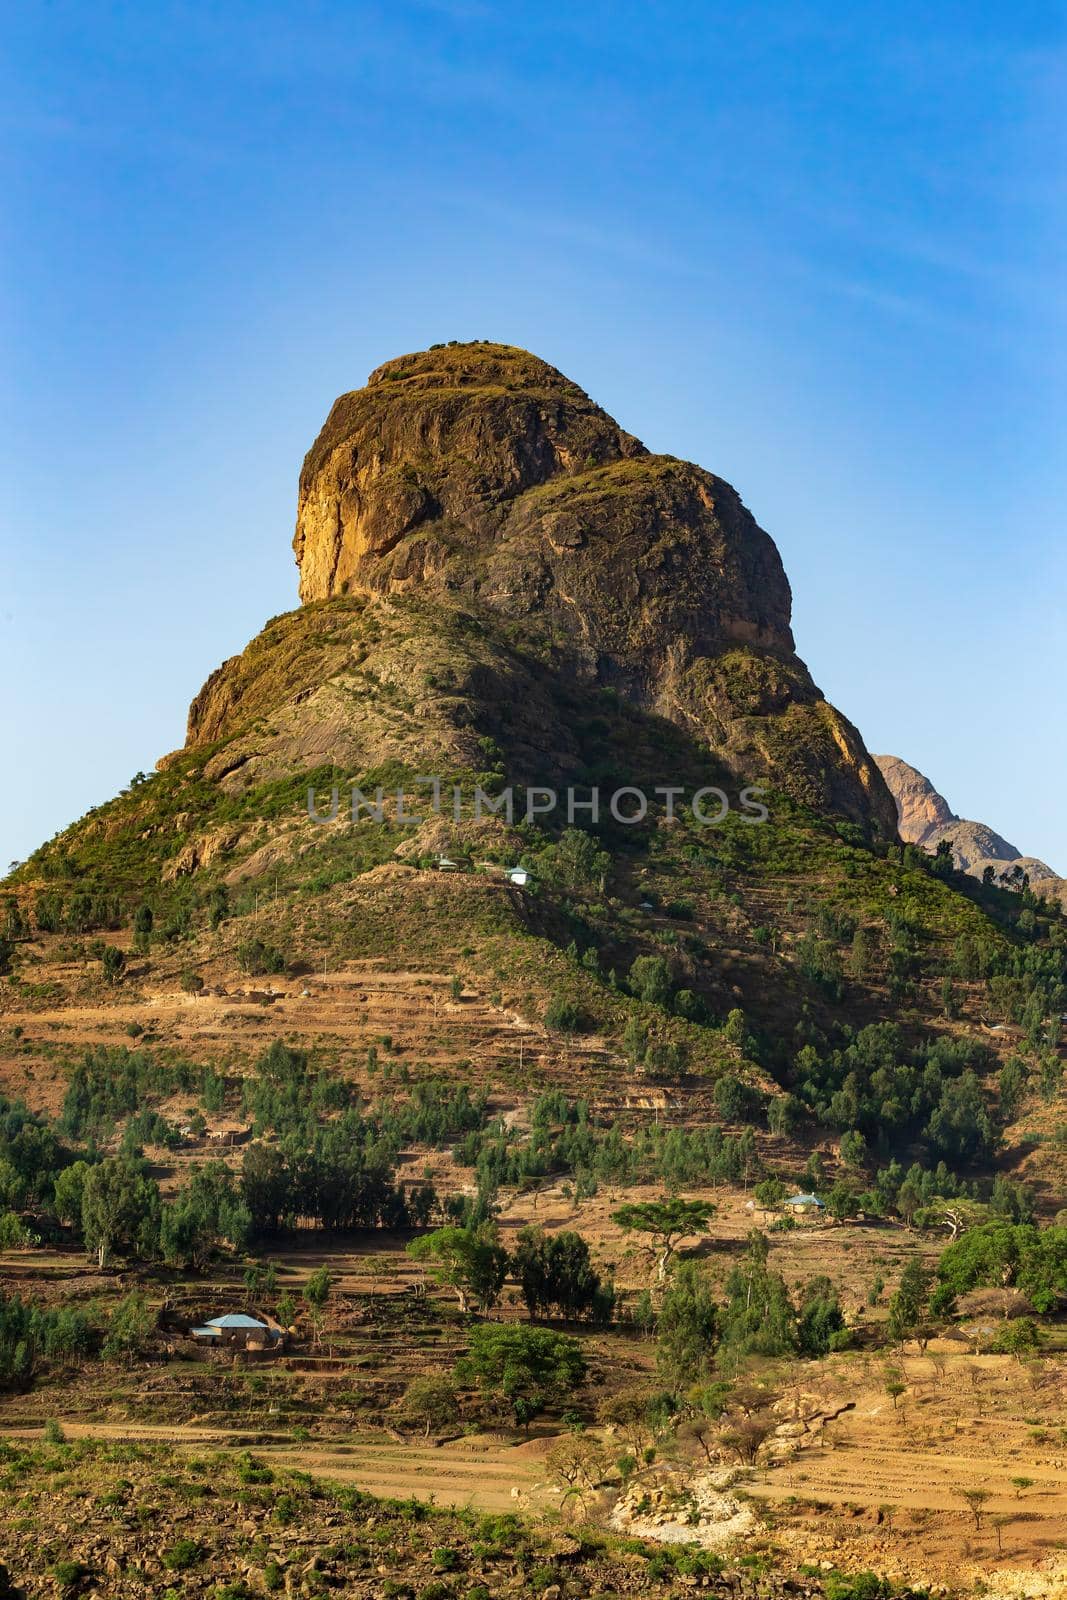 Beautiful mountain landscape with traditional ethiopian houses in valley. Amhara region near city Lalibela. Ethiopia, Africa.